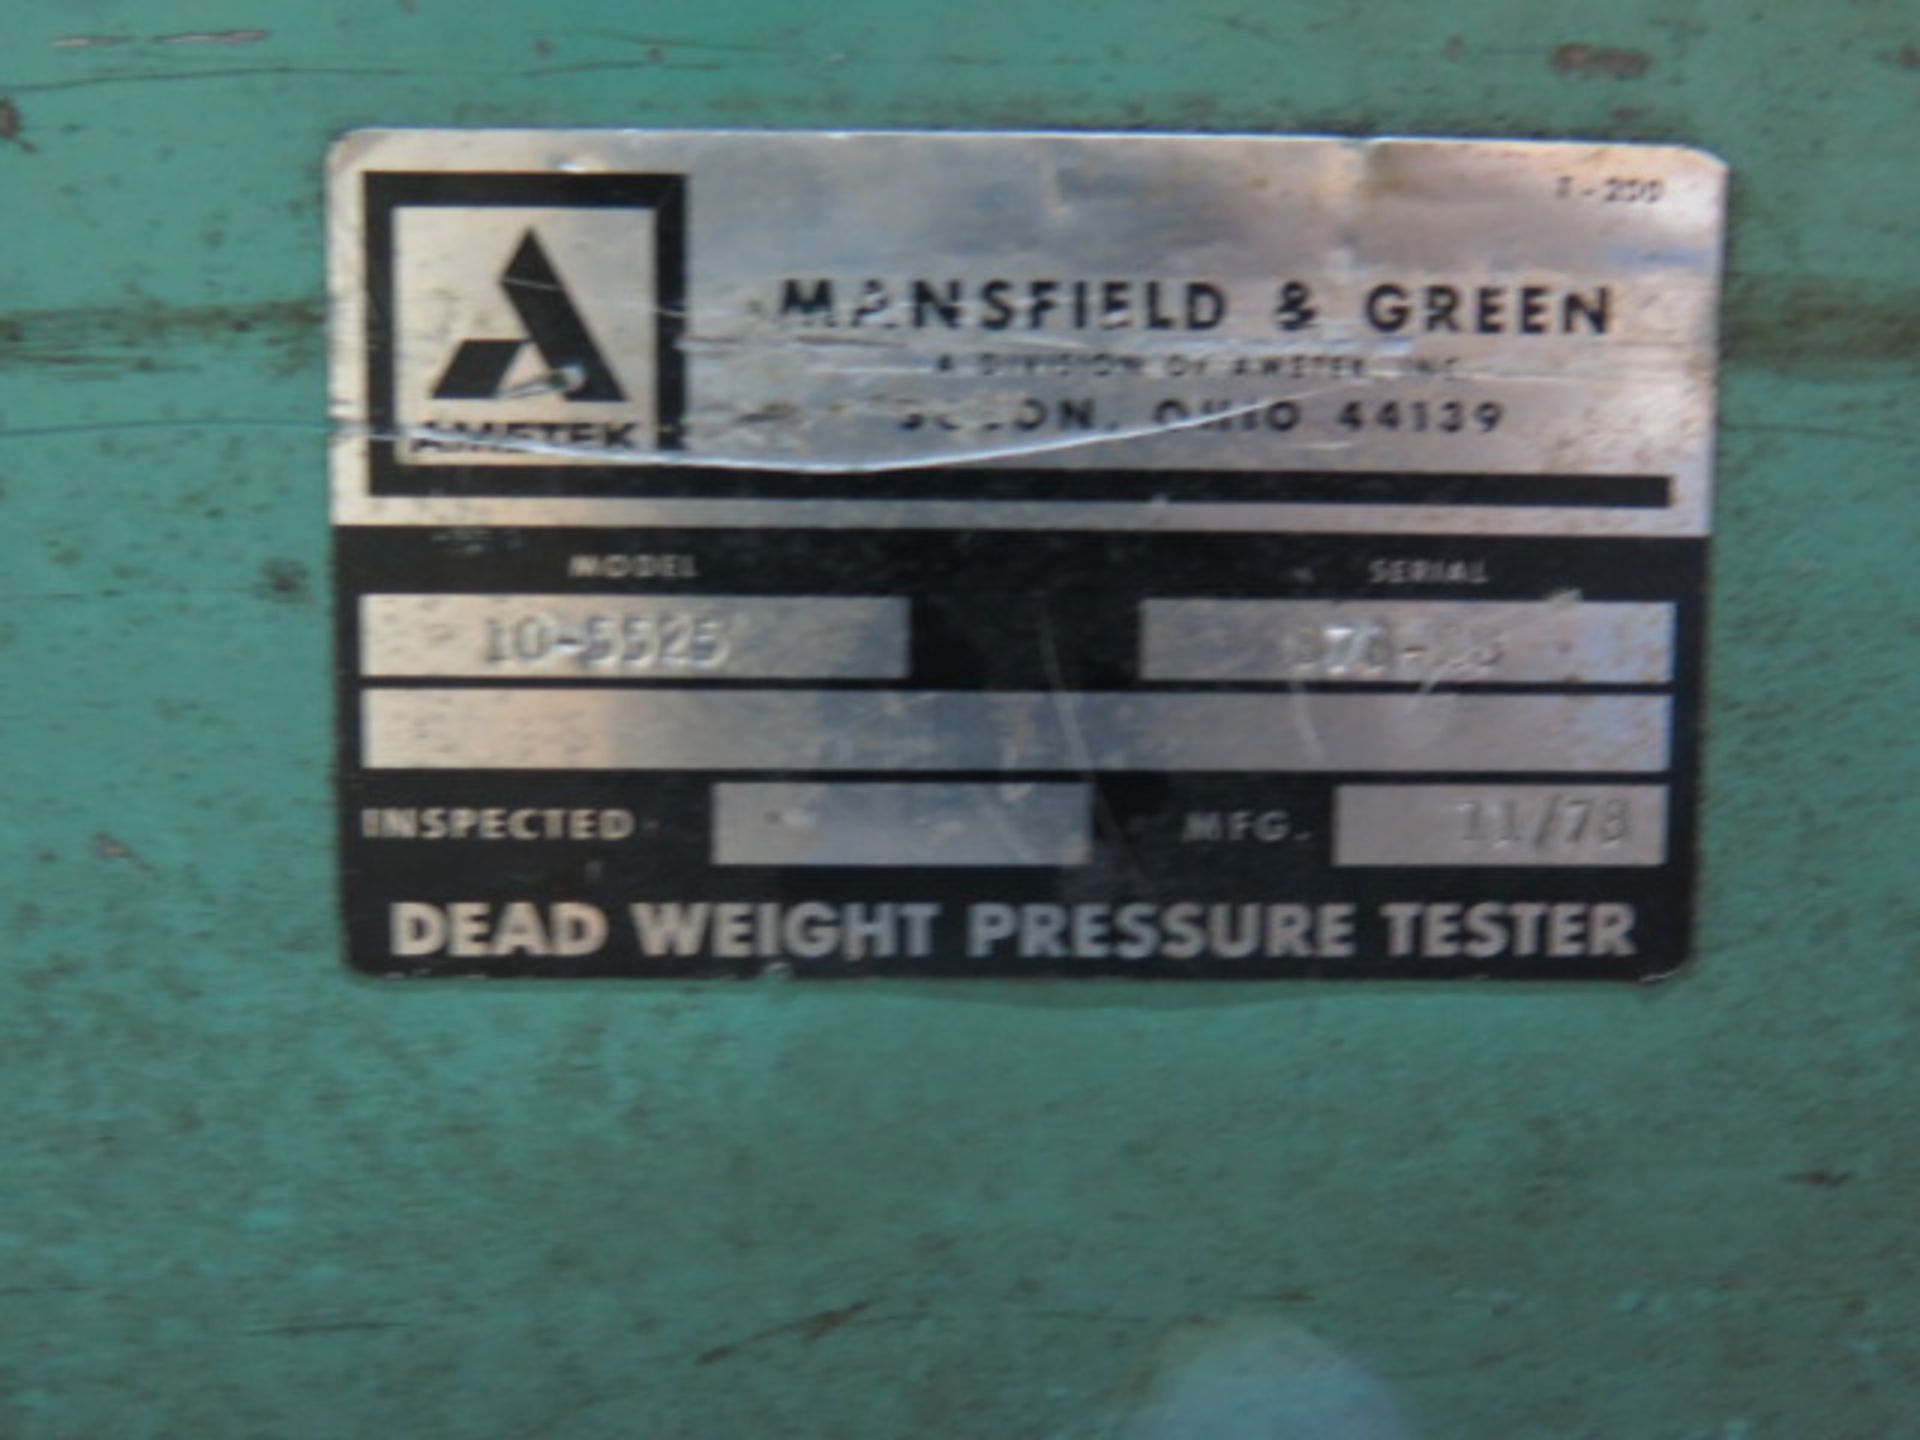 Amatek Type 10-5525 Dead Weight Tester w/ Acces (SOLD AS-IS - NO WARRANTY) - Image 11 of 11